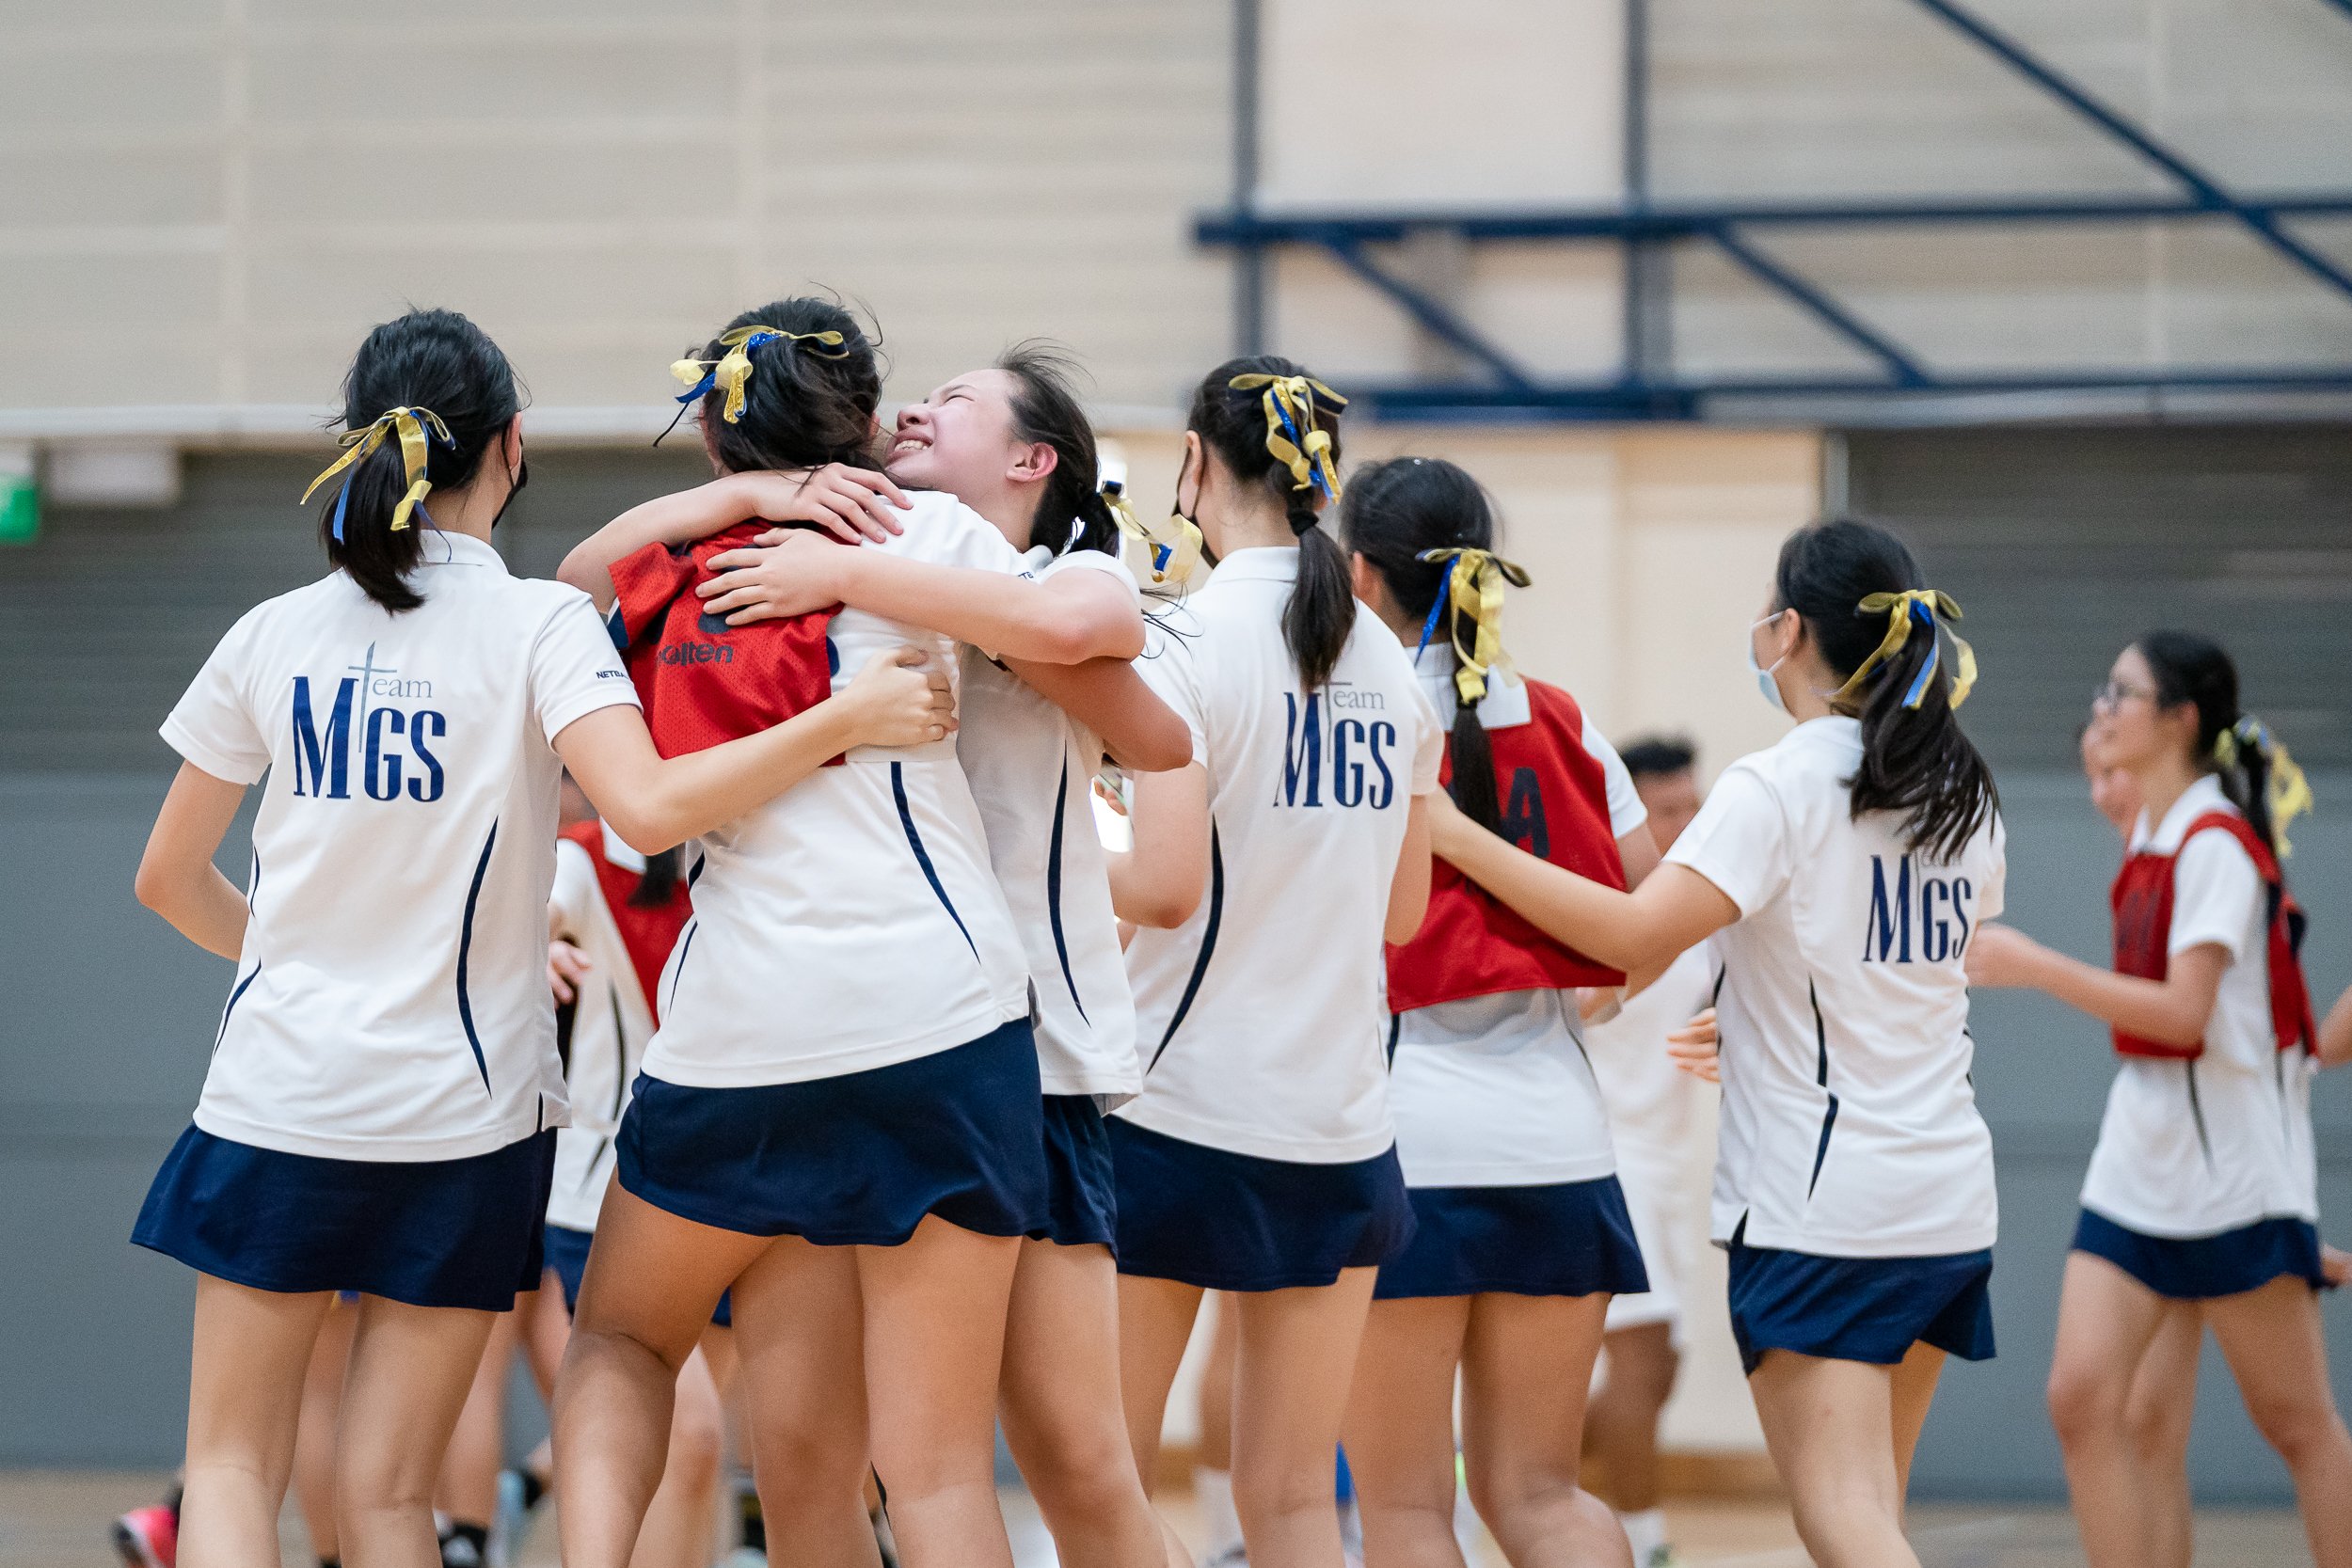 2022-05-19_NSG Netball_Photo By Ron Low_012